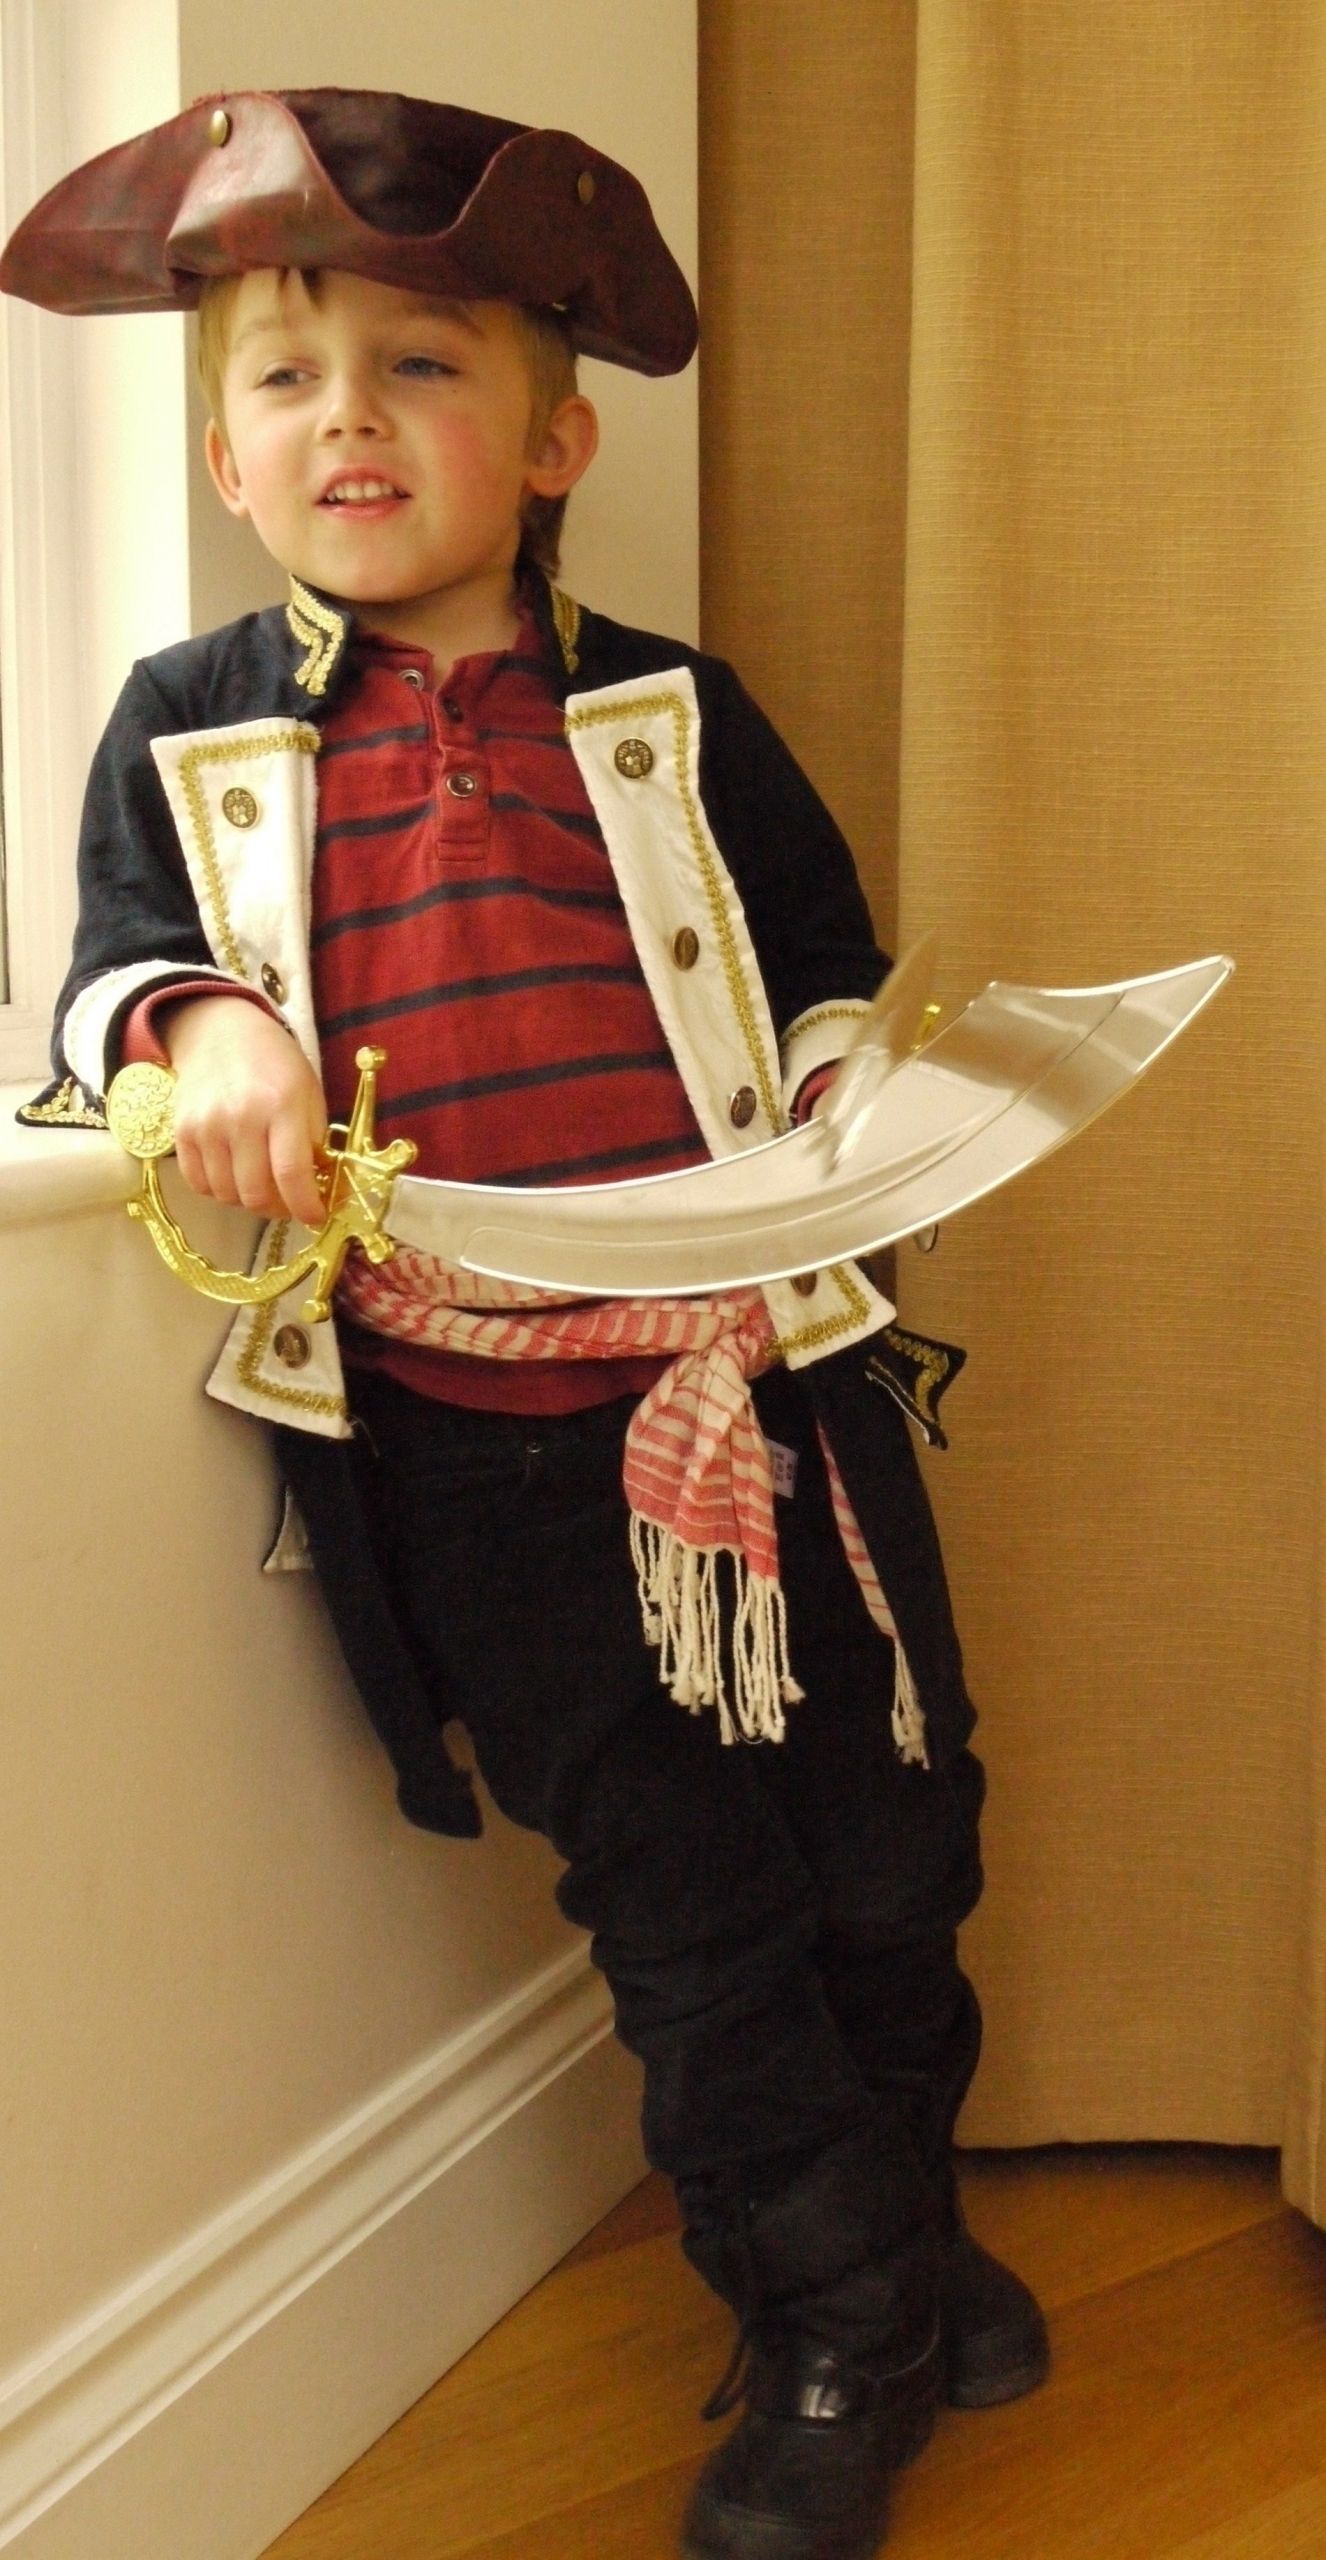 DIY Costume For Kids
 10 Attractive Homemade Pirate Costume Ideas For Kids 2019